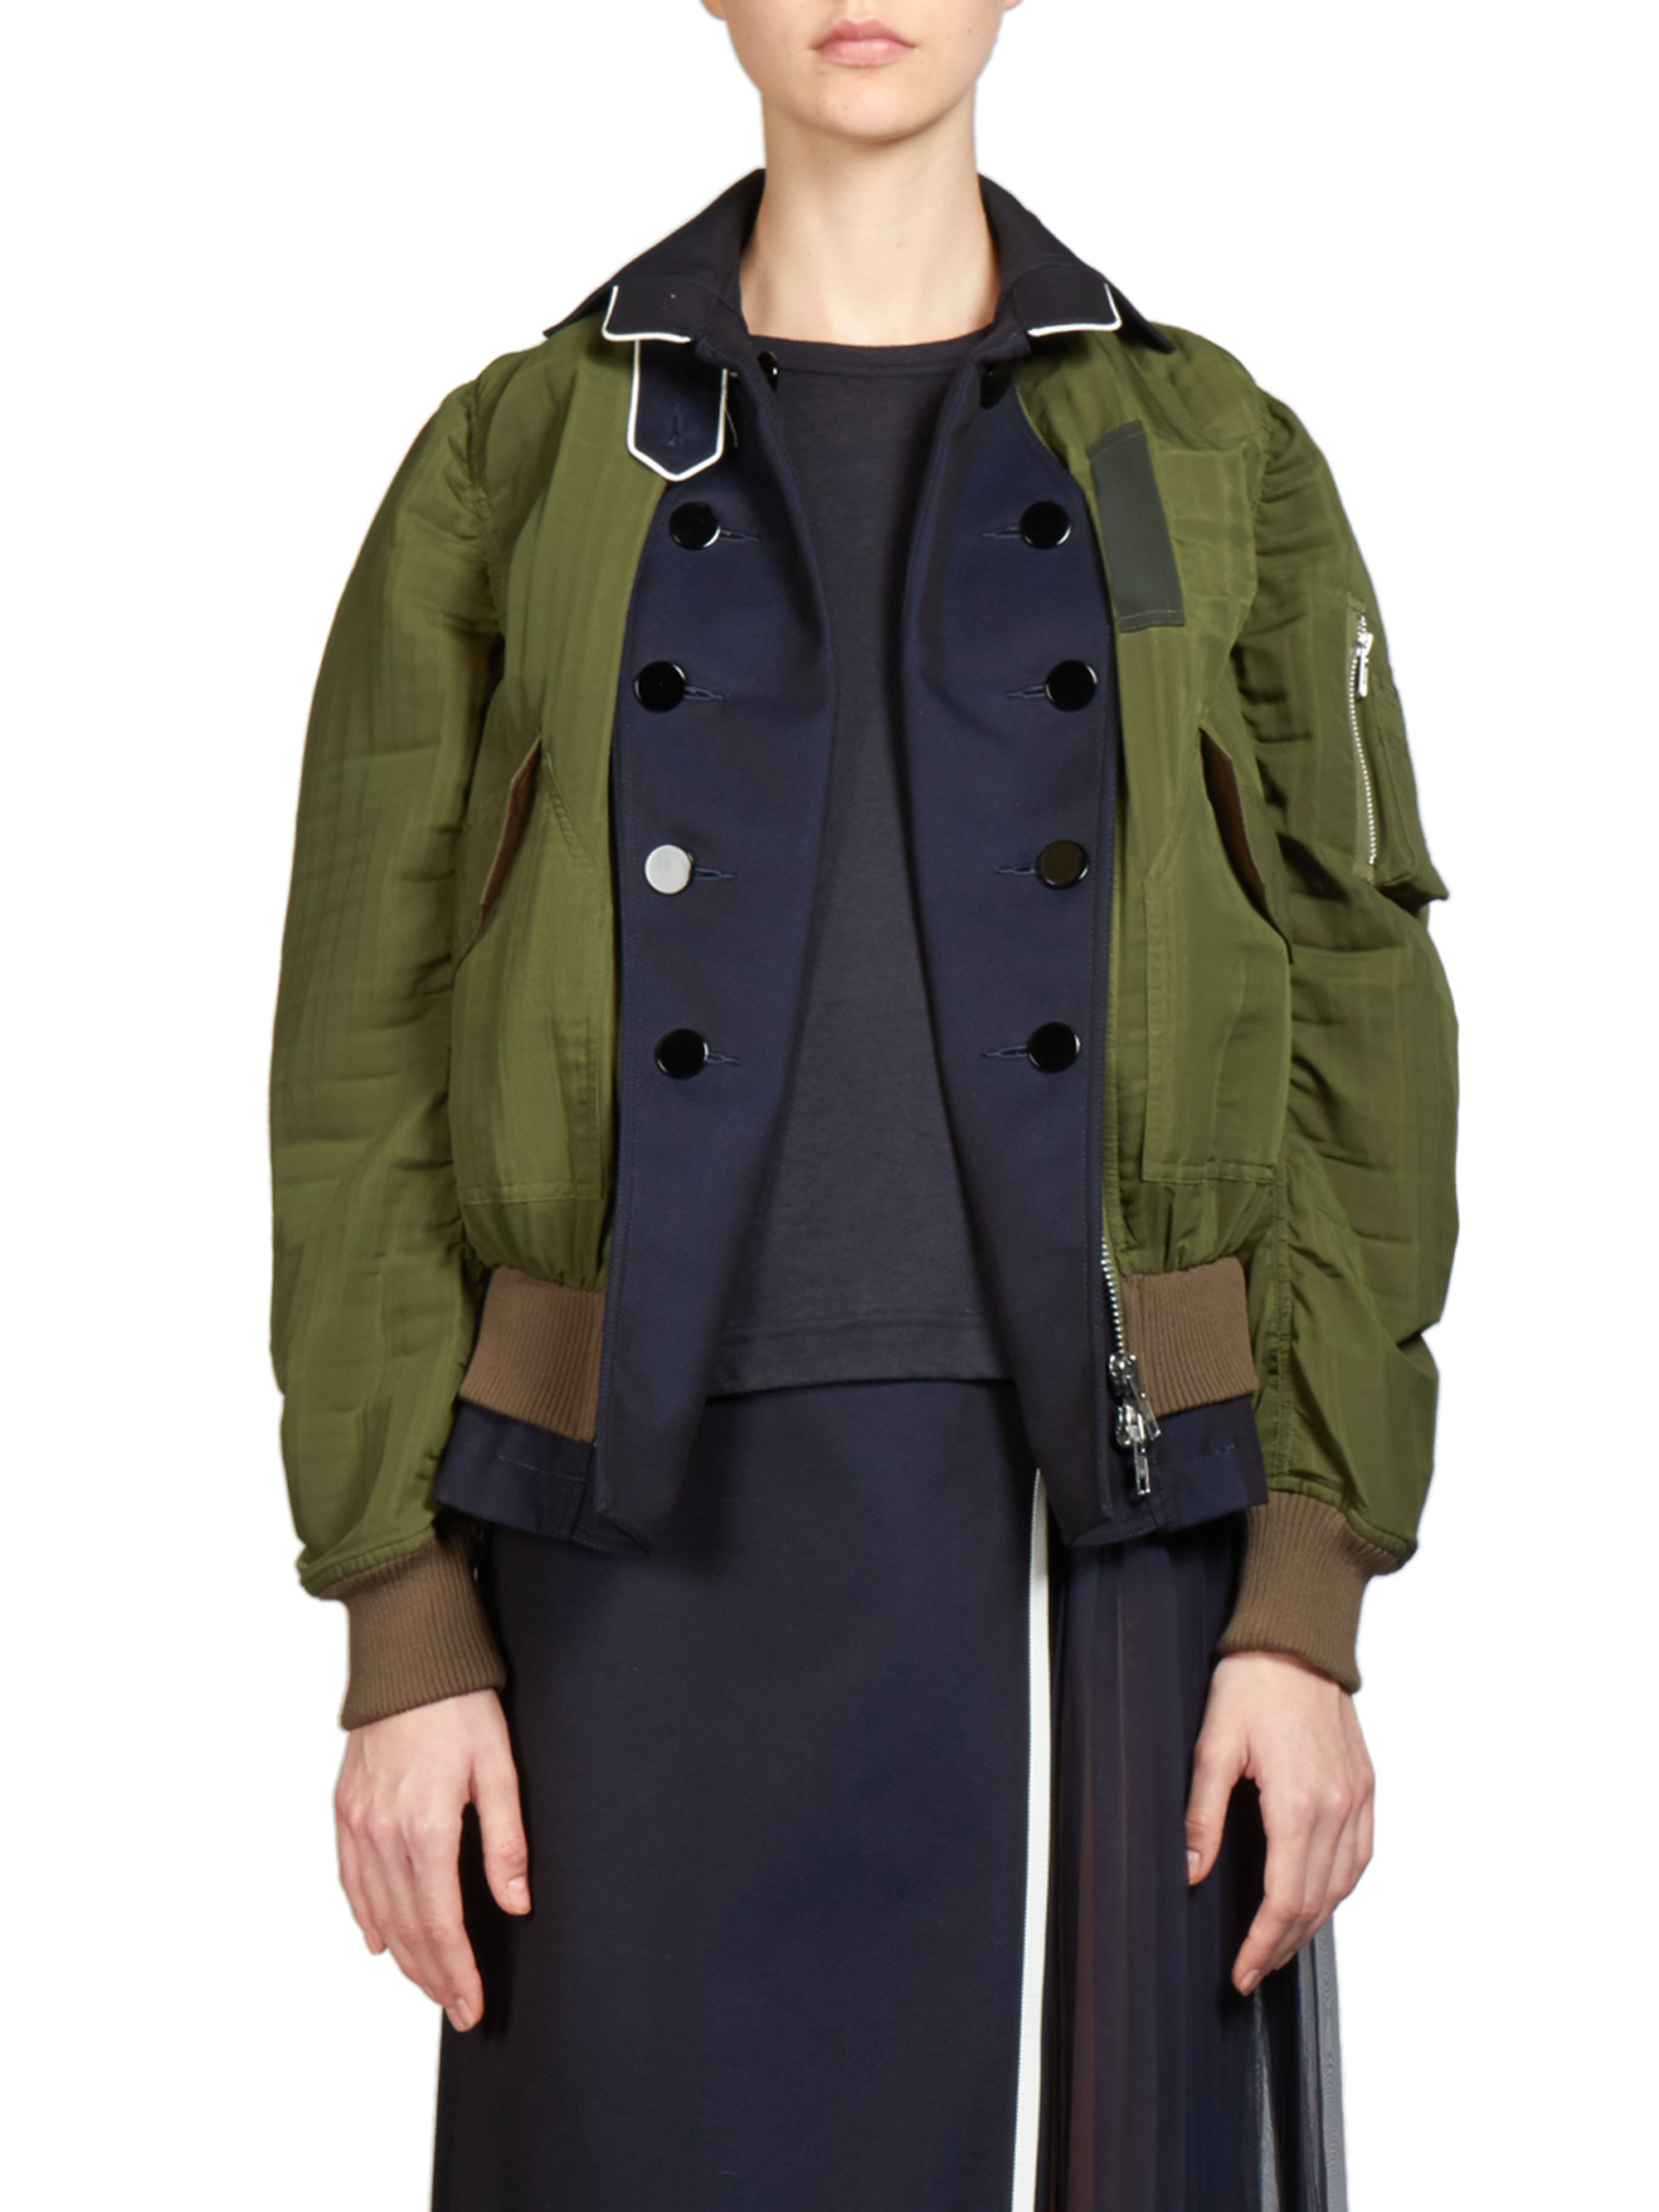 Lyst - Sacai Layered Bomber Jacket in Green